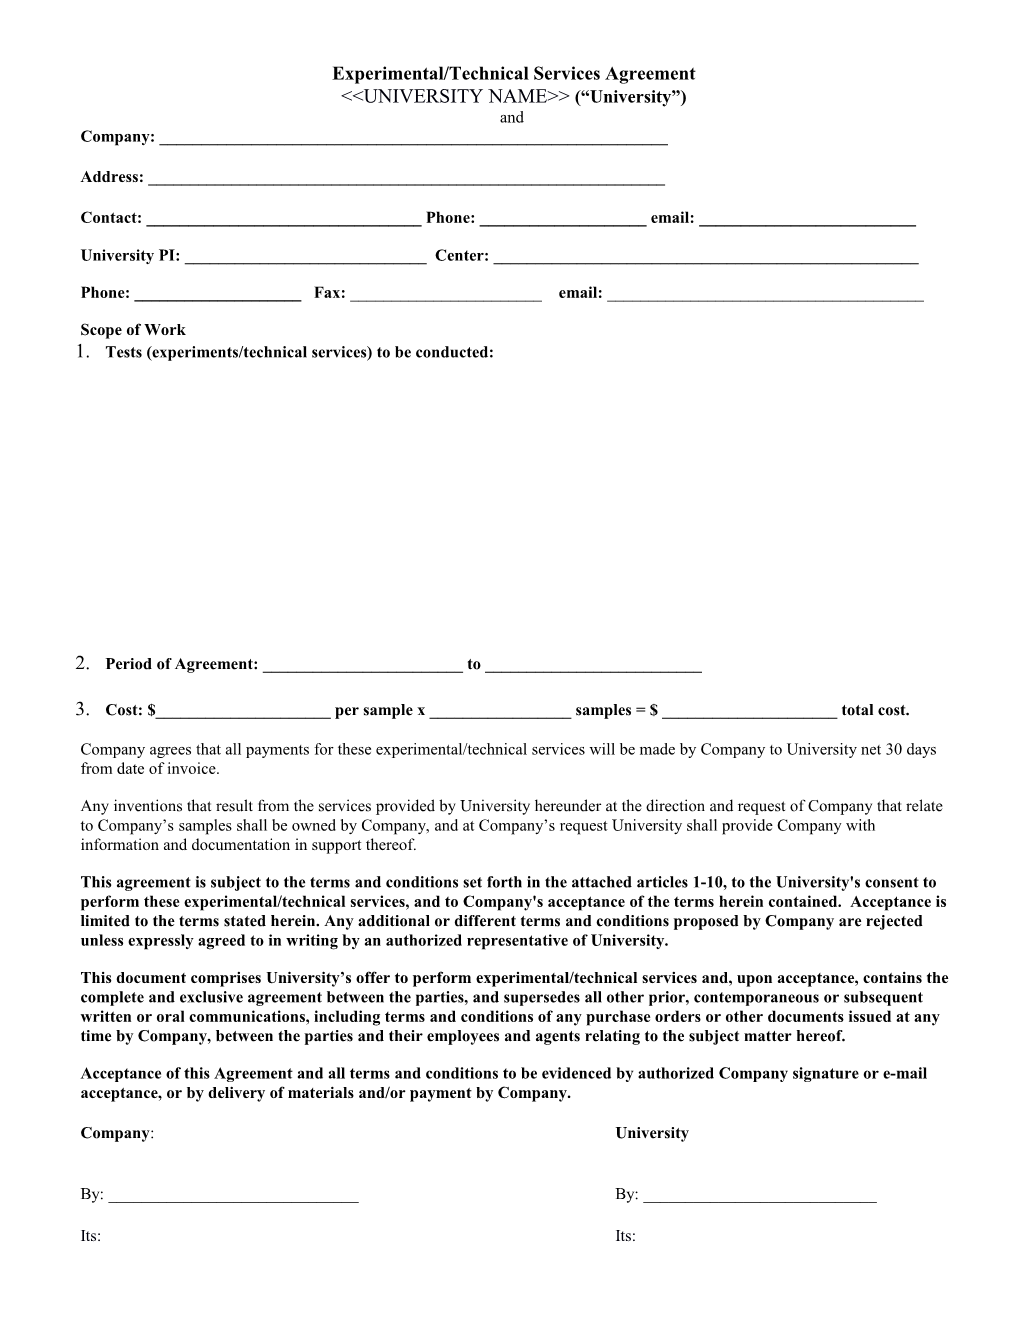 Experimental/Technical Services Agreement